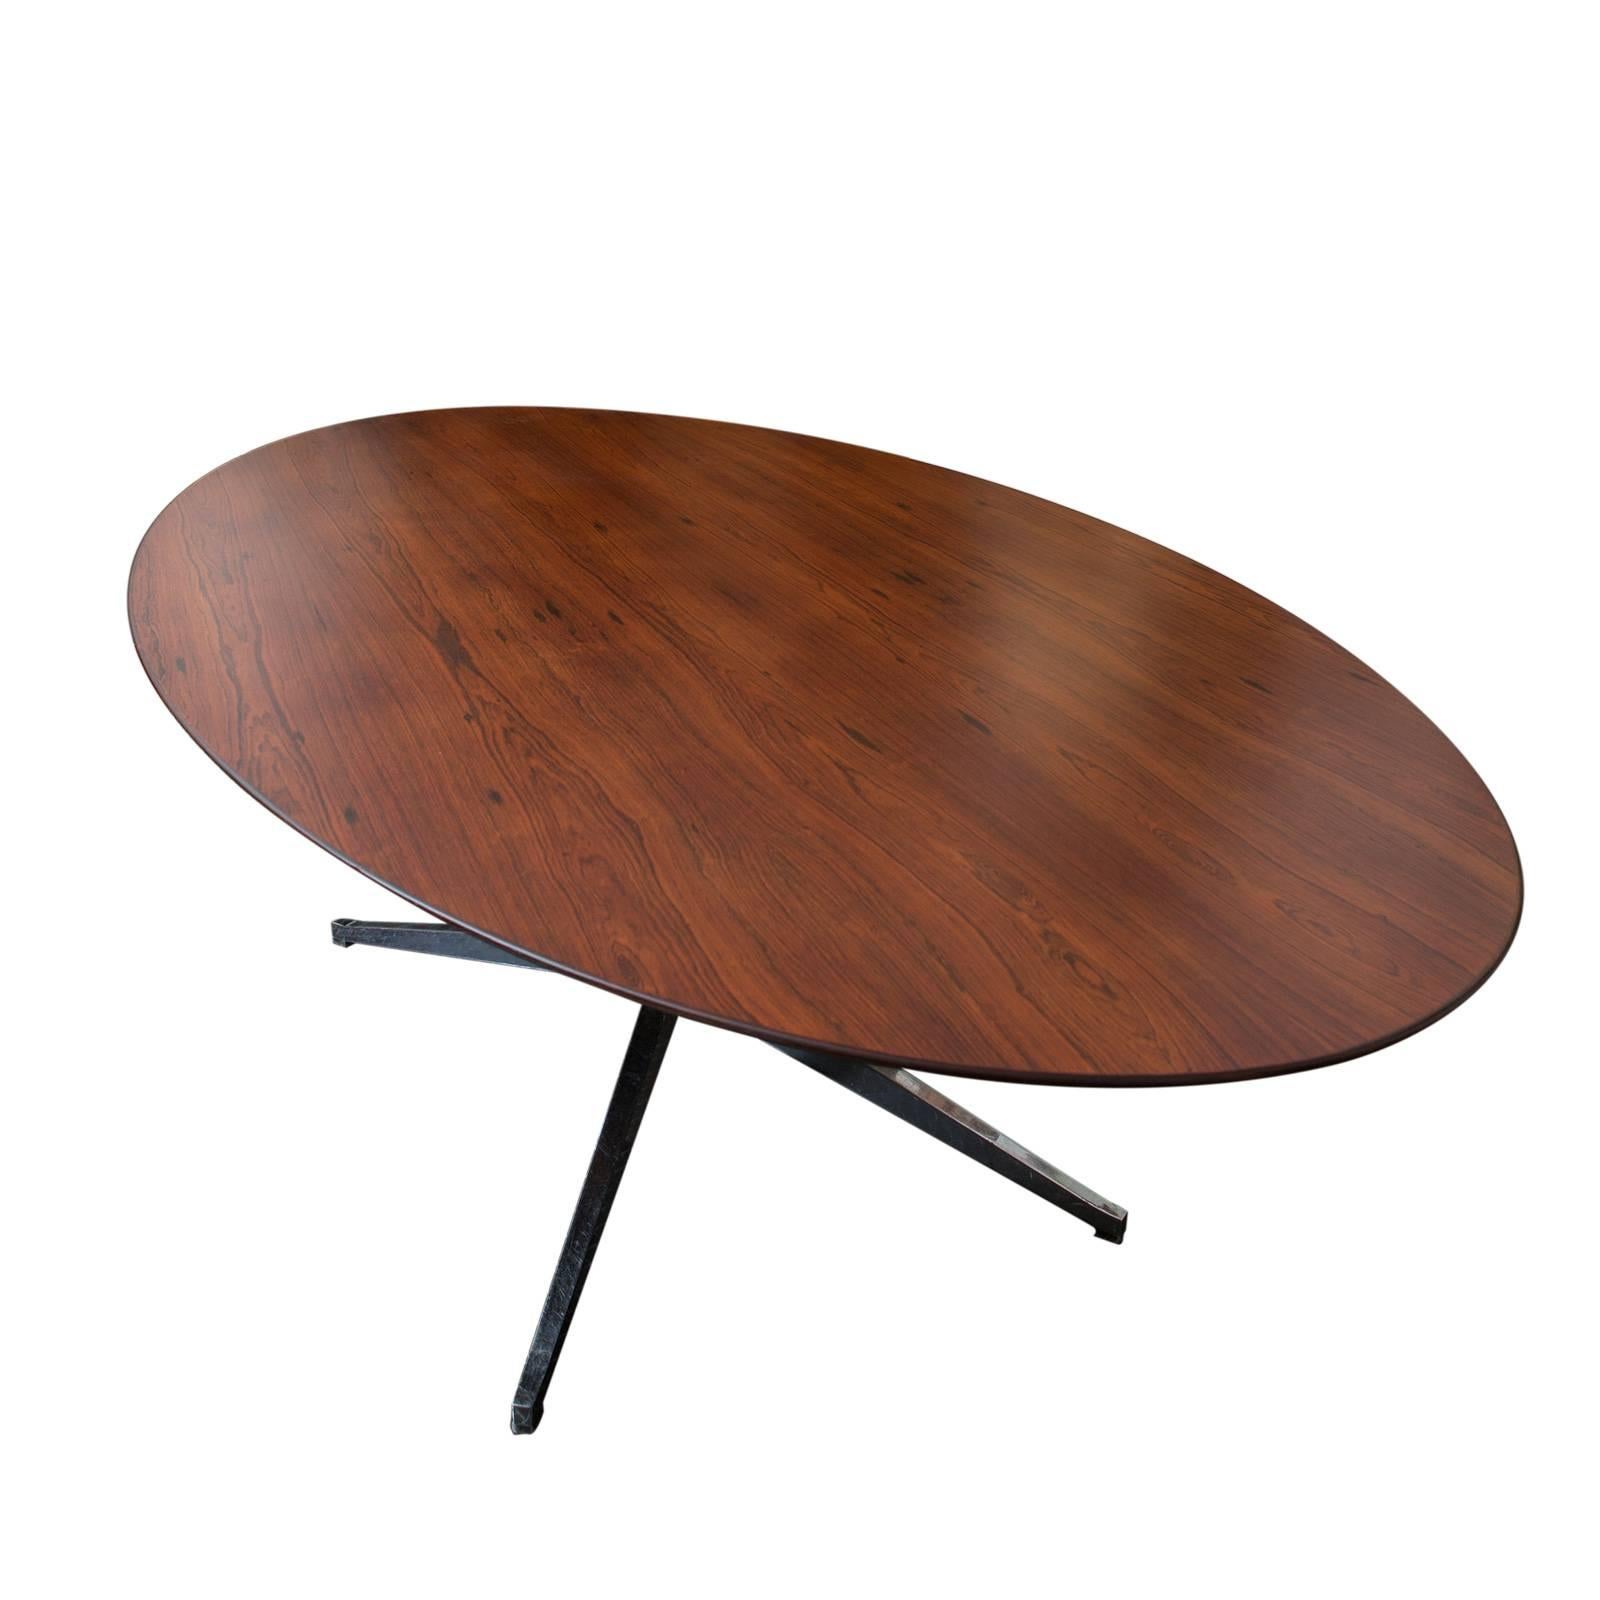 Mid-20th Century Classic Florence Knoll Rosewood Oval Dining Table on Chrome Base